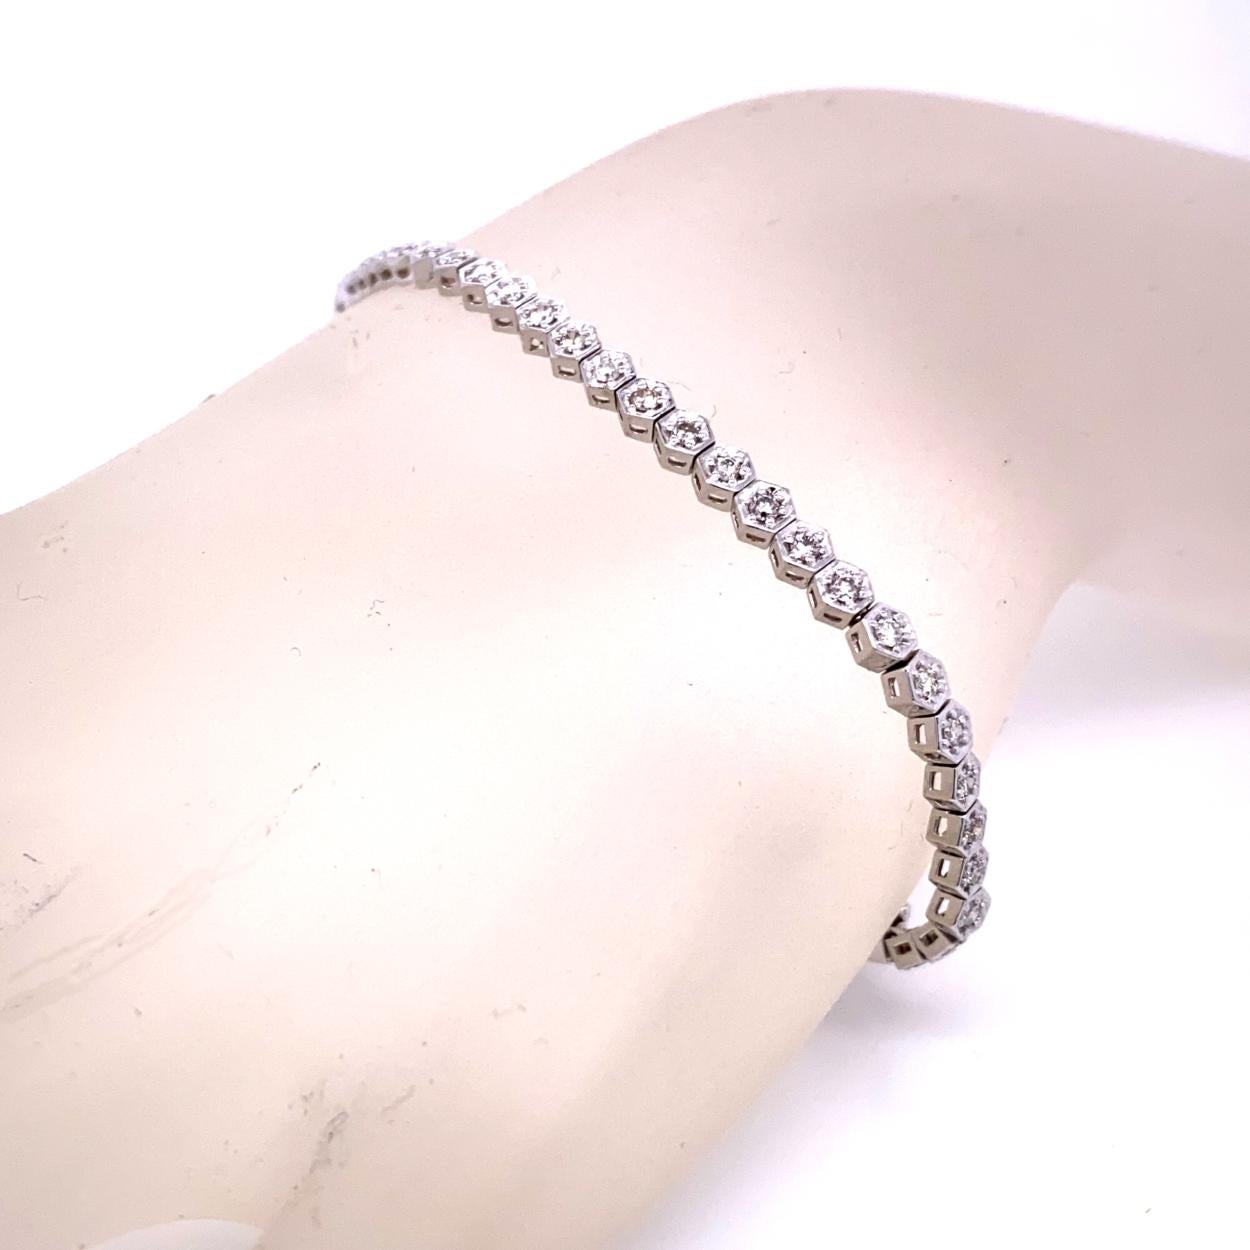 This Diamond Tennis Bracelet consists of 56 Links of Honeycomb Illusion Set 1.6mm Round Brilliant diamonds set in 14K White Gold.   The bracelet comes with a Safety Lock to protect it from loss. 
Total Weight of diamonds: 1.04 Ct 
Total Weight of